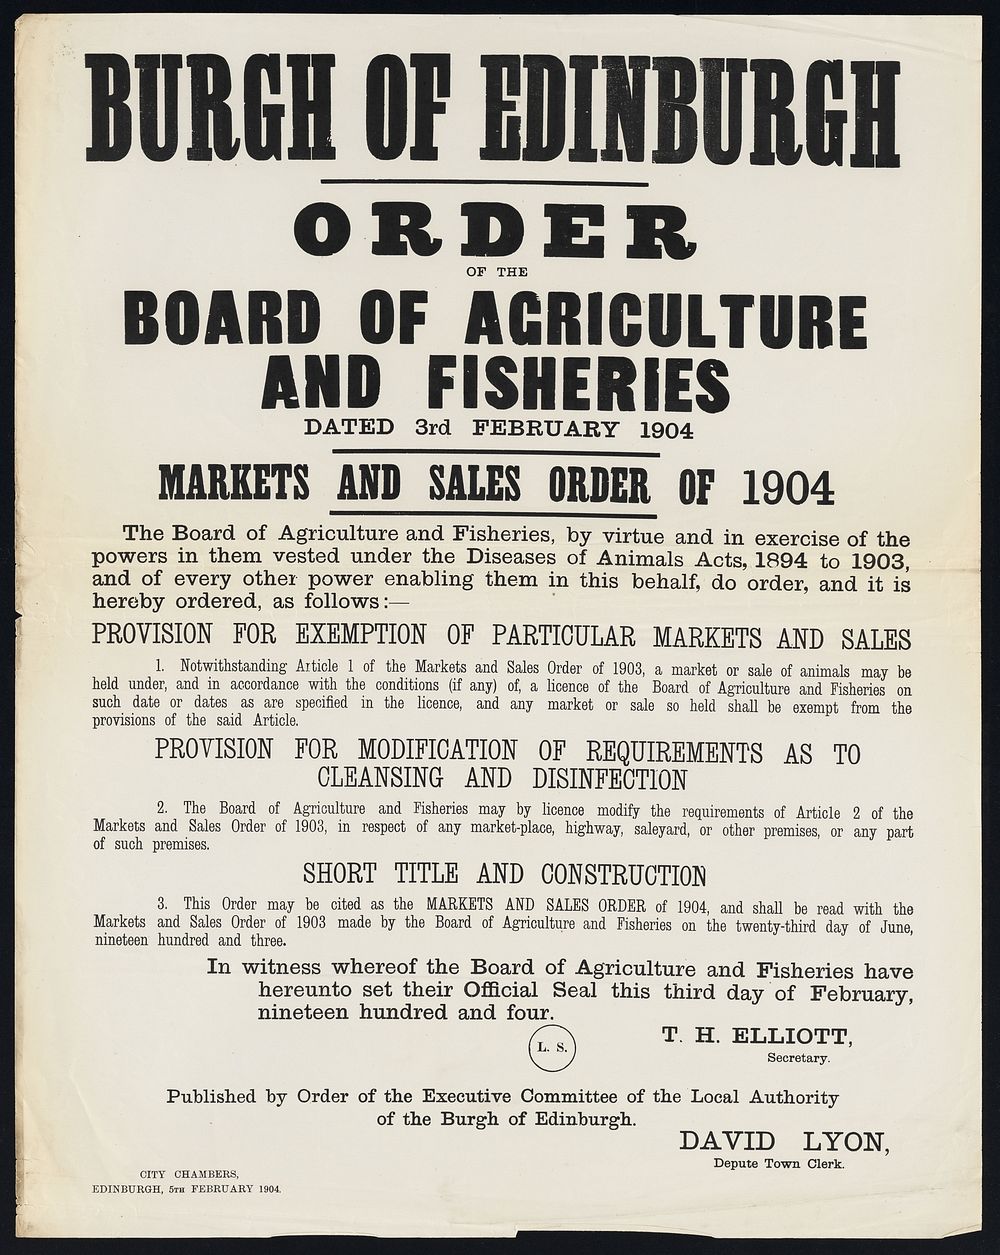 Order of the Board of Agriculture and Fisheries dated 3rd February 1904 : market and sales order of 1904 / T.H. Elliott…